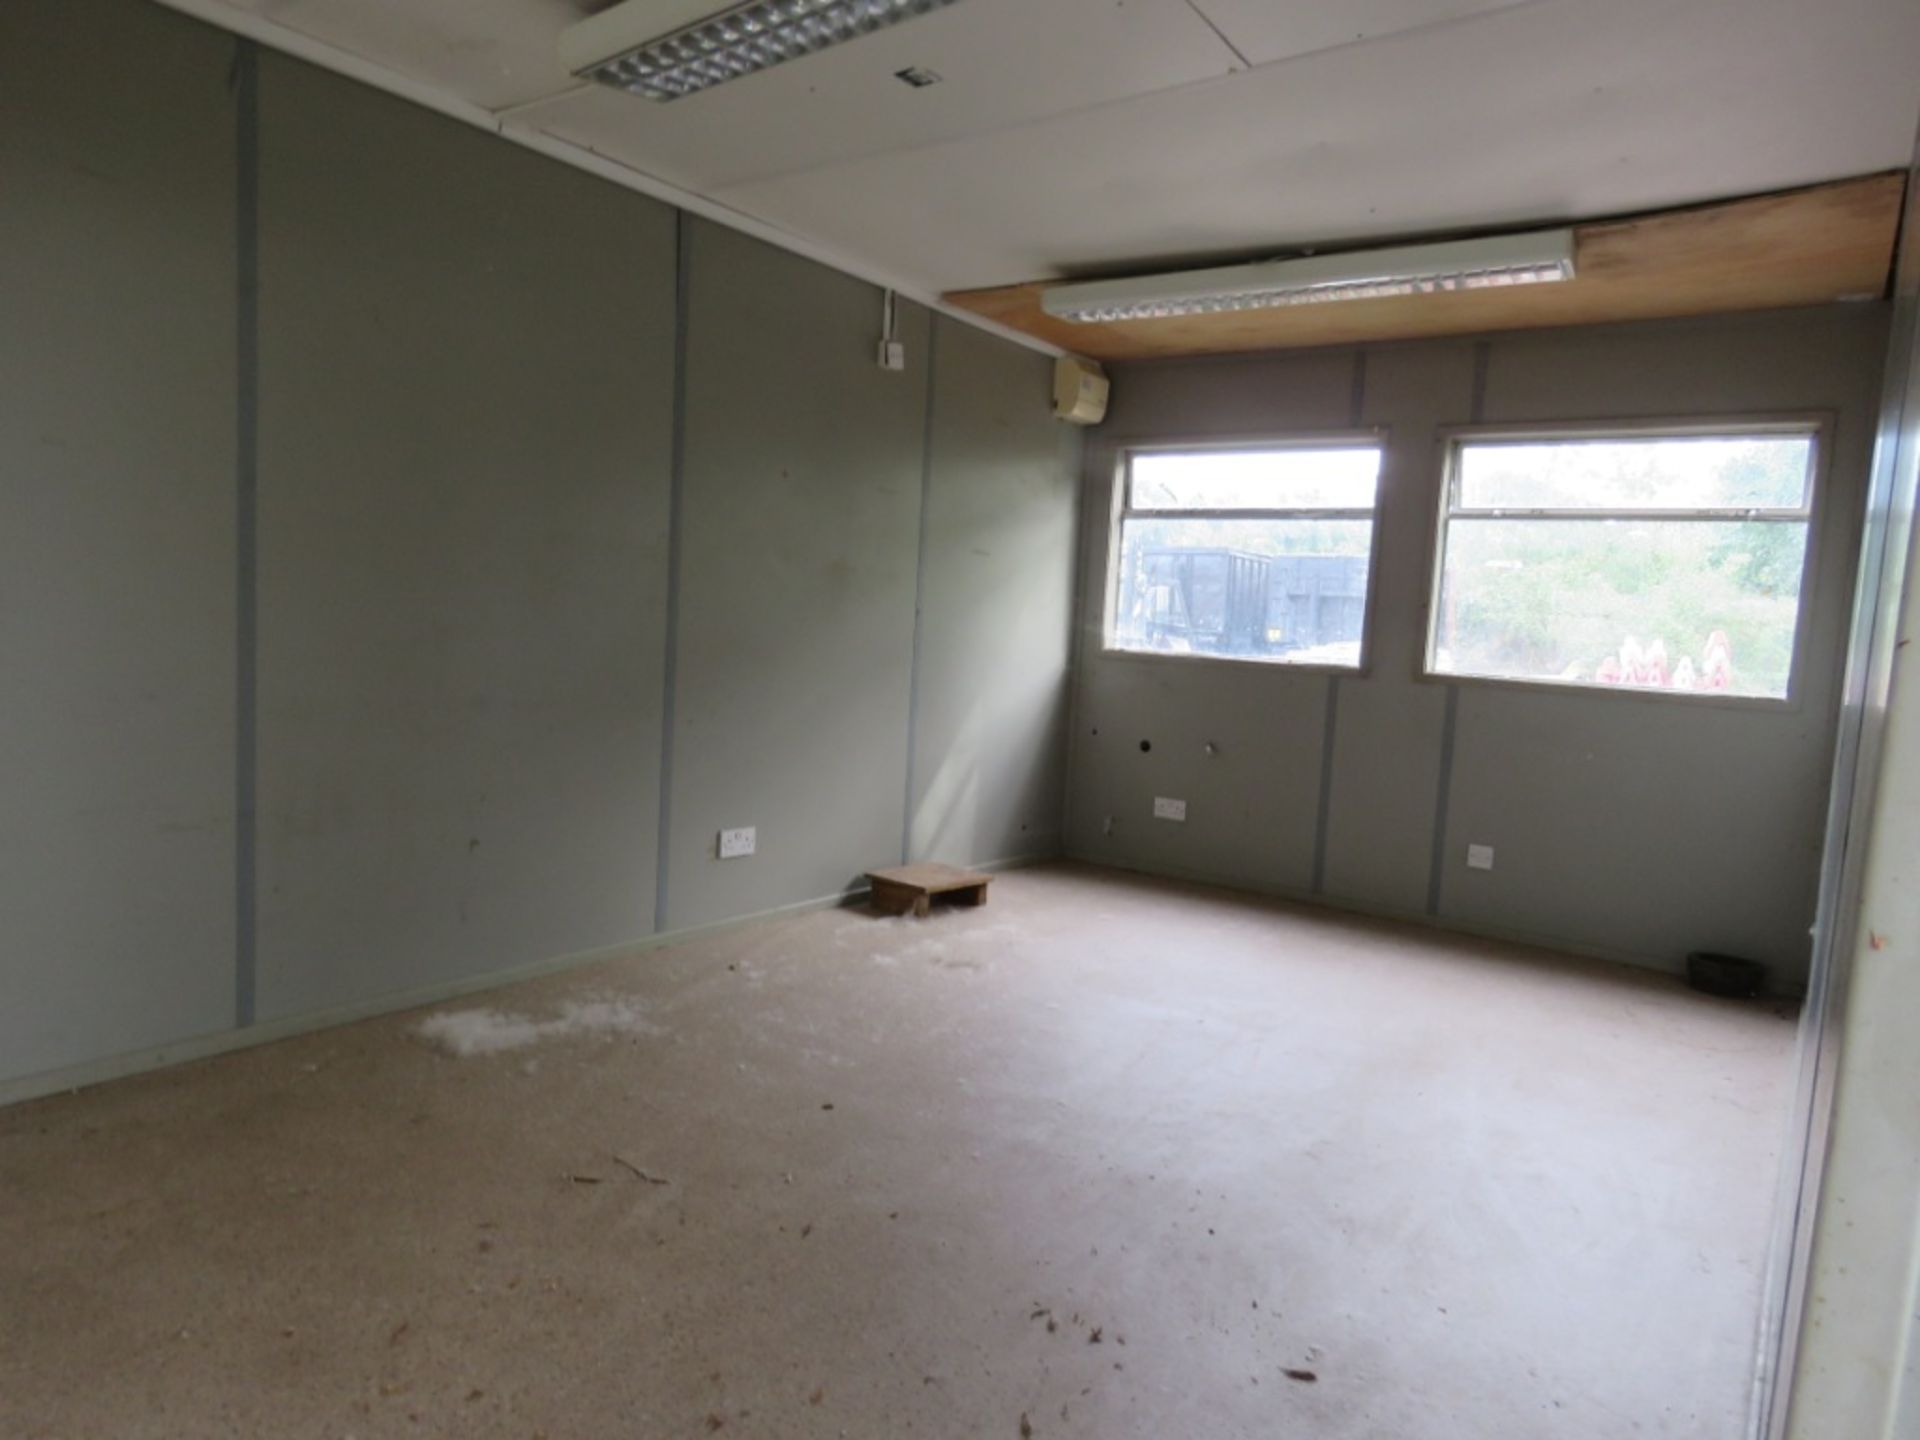 32FT SITE CABIN OFFICE. PREVIOUSLY USED ON HOUSE BUILDING PROJECT. - Image 3 of 4